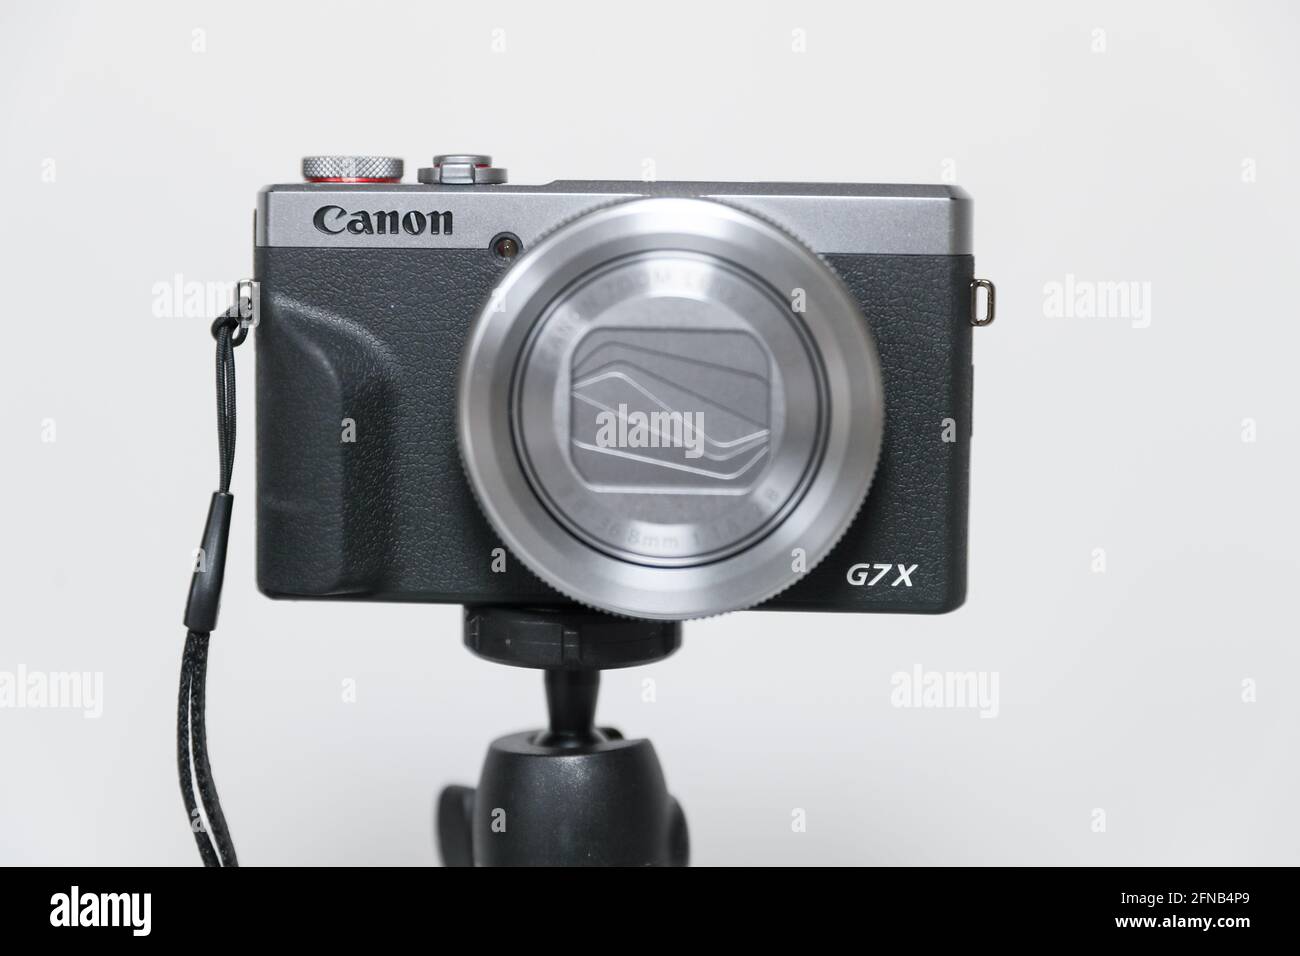 Princeton New Jersey May 15 2021: The Canon PowerShot G7 X Mark III is a premium compact camera with a new 1'-type, 20MP Stacked CMOS sensor. Stock Photo